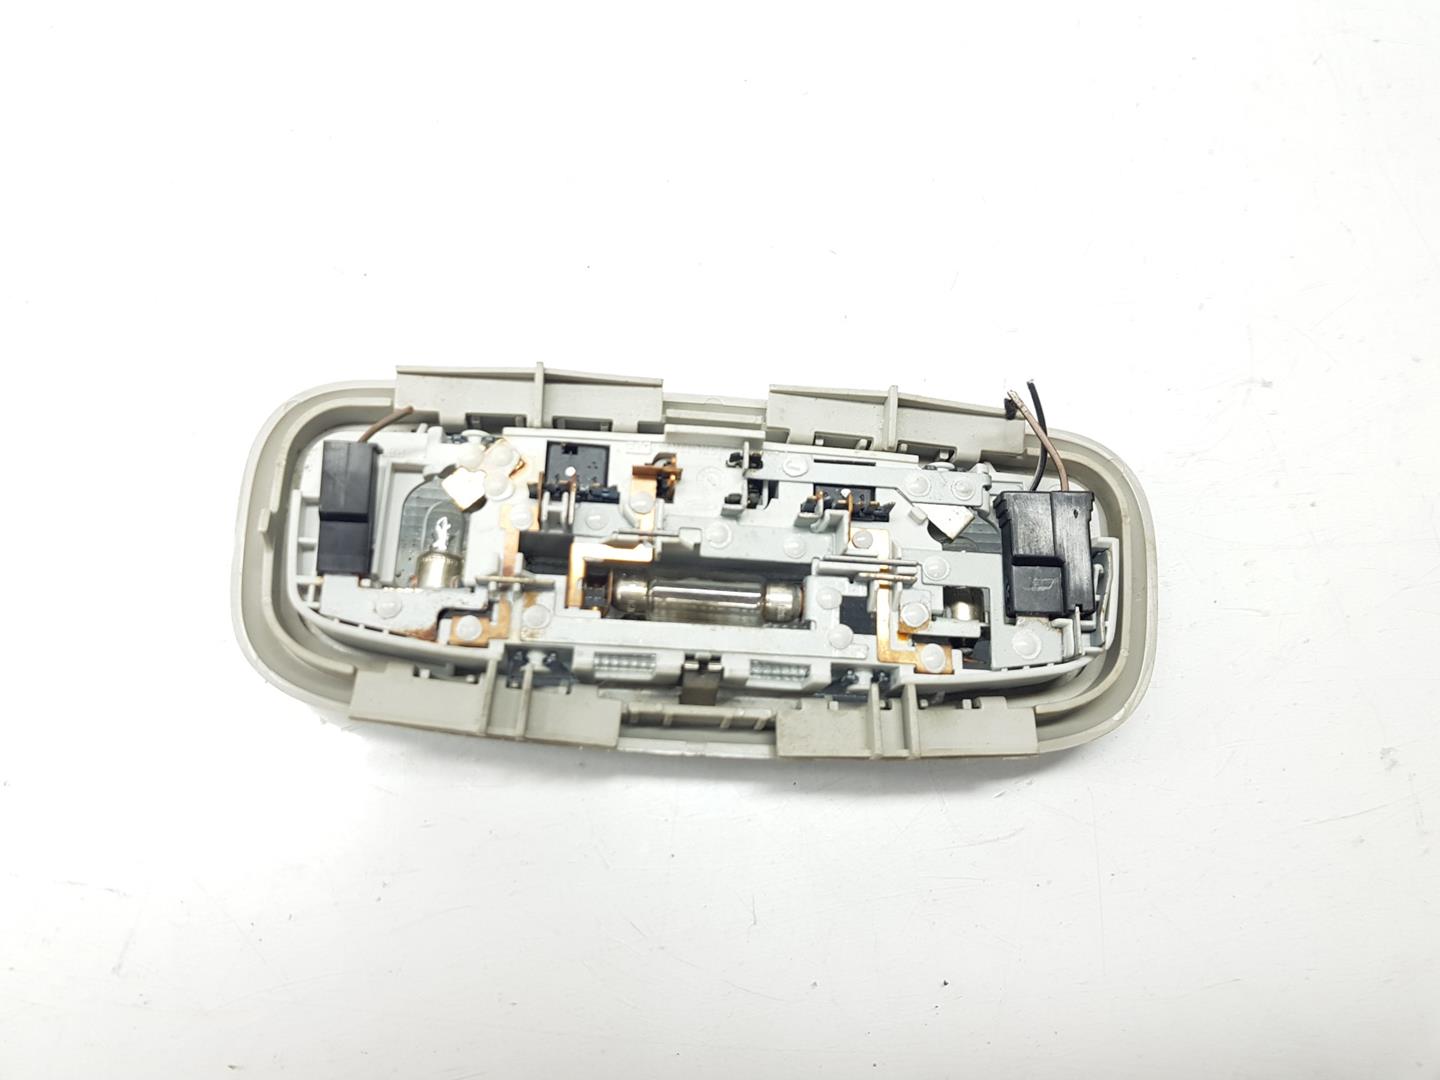 FORD S-Max 1 generation (2006-2015) Other Interior Parts 1930713, EK2613K767AA34X1 19782610